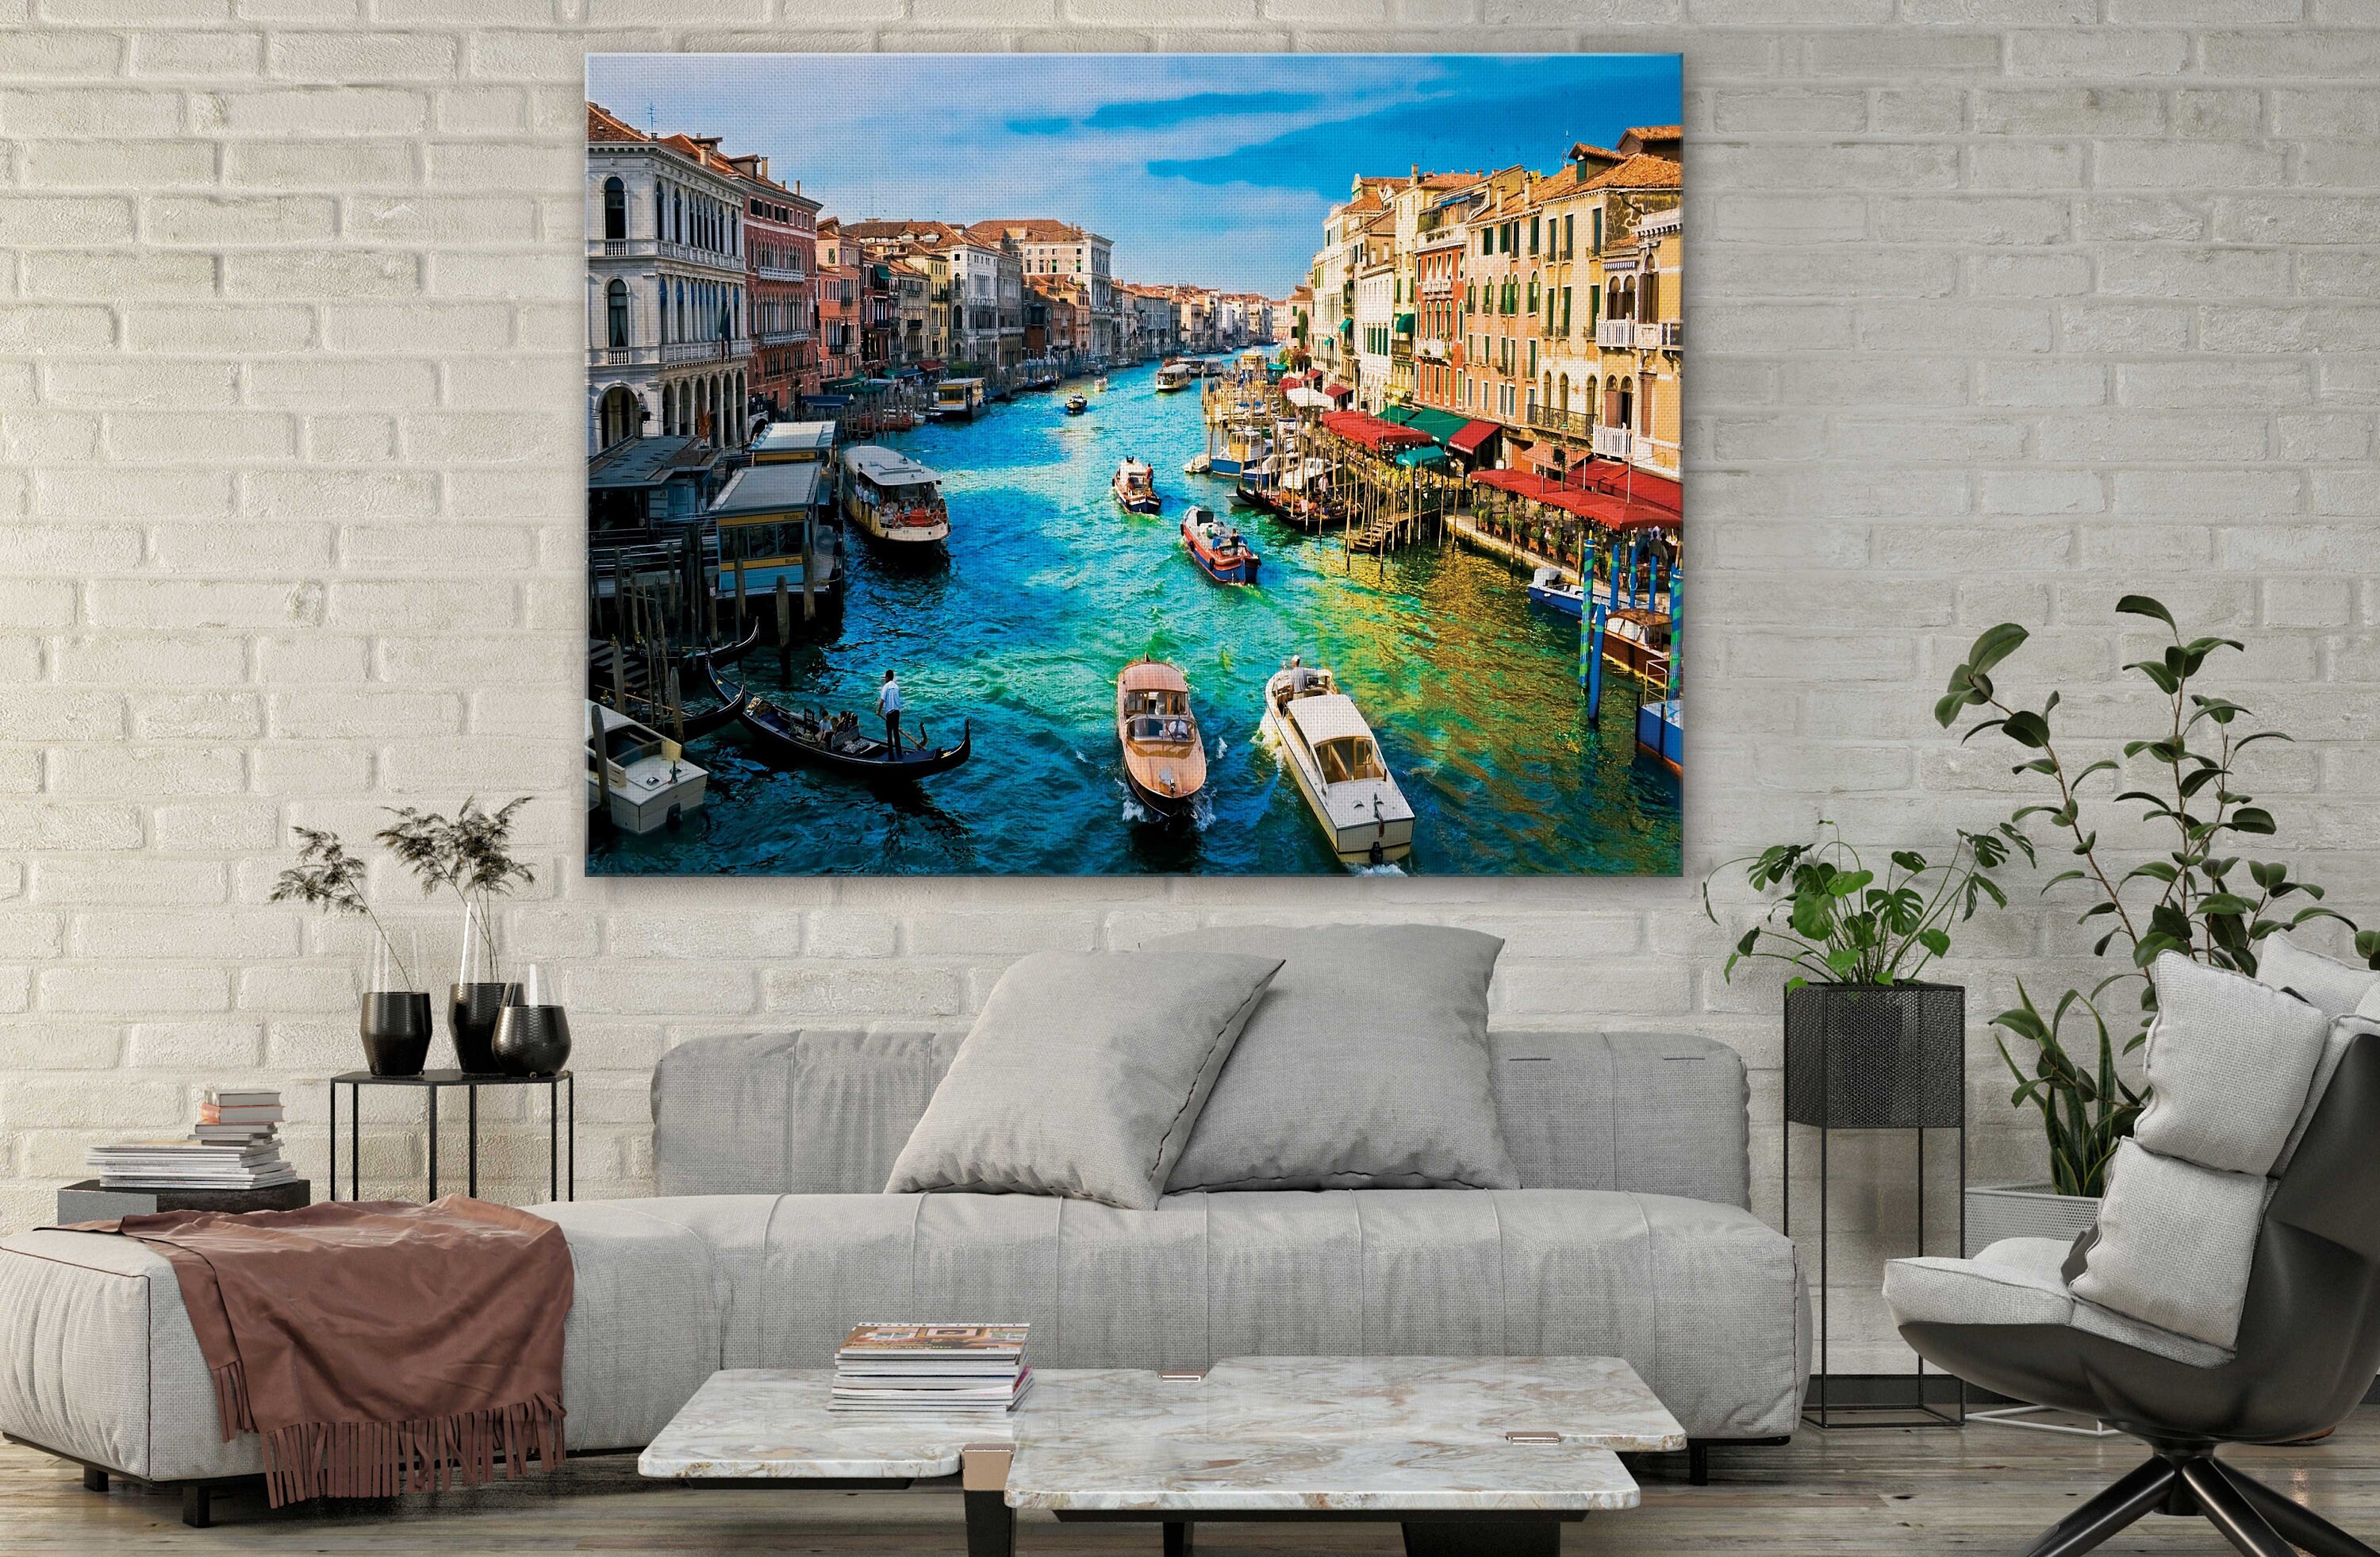 Famous Places Art Canvas-Italy Famous Grand Canal Art Canvas | Etsy